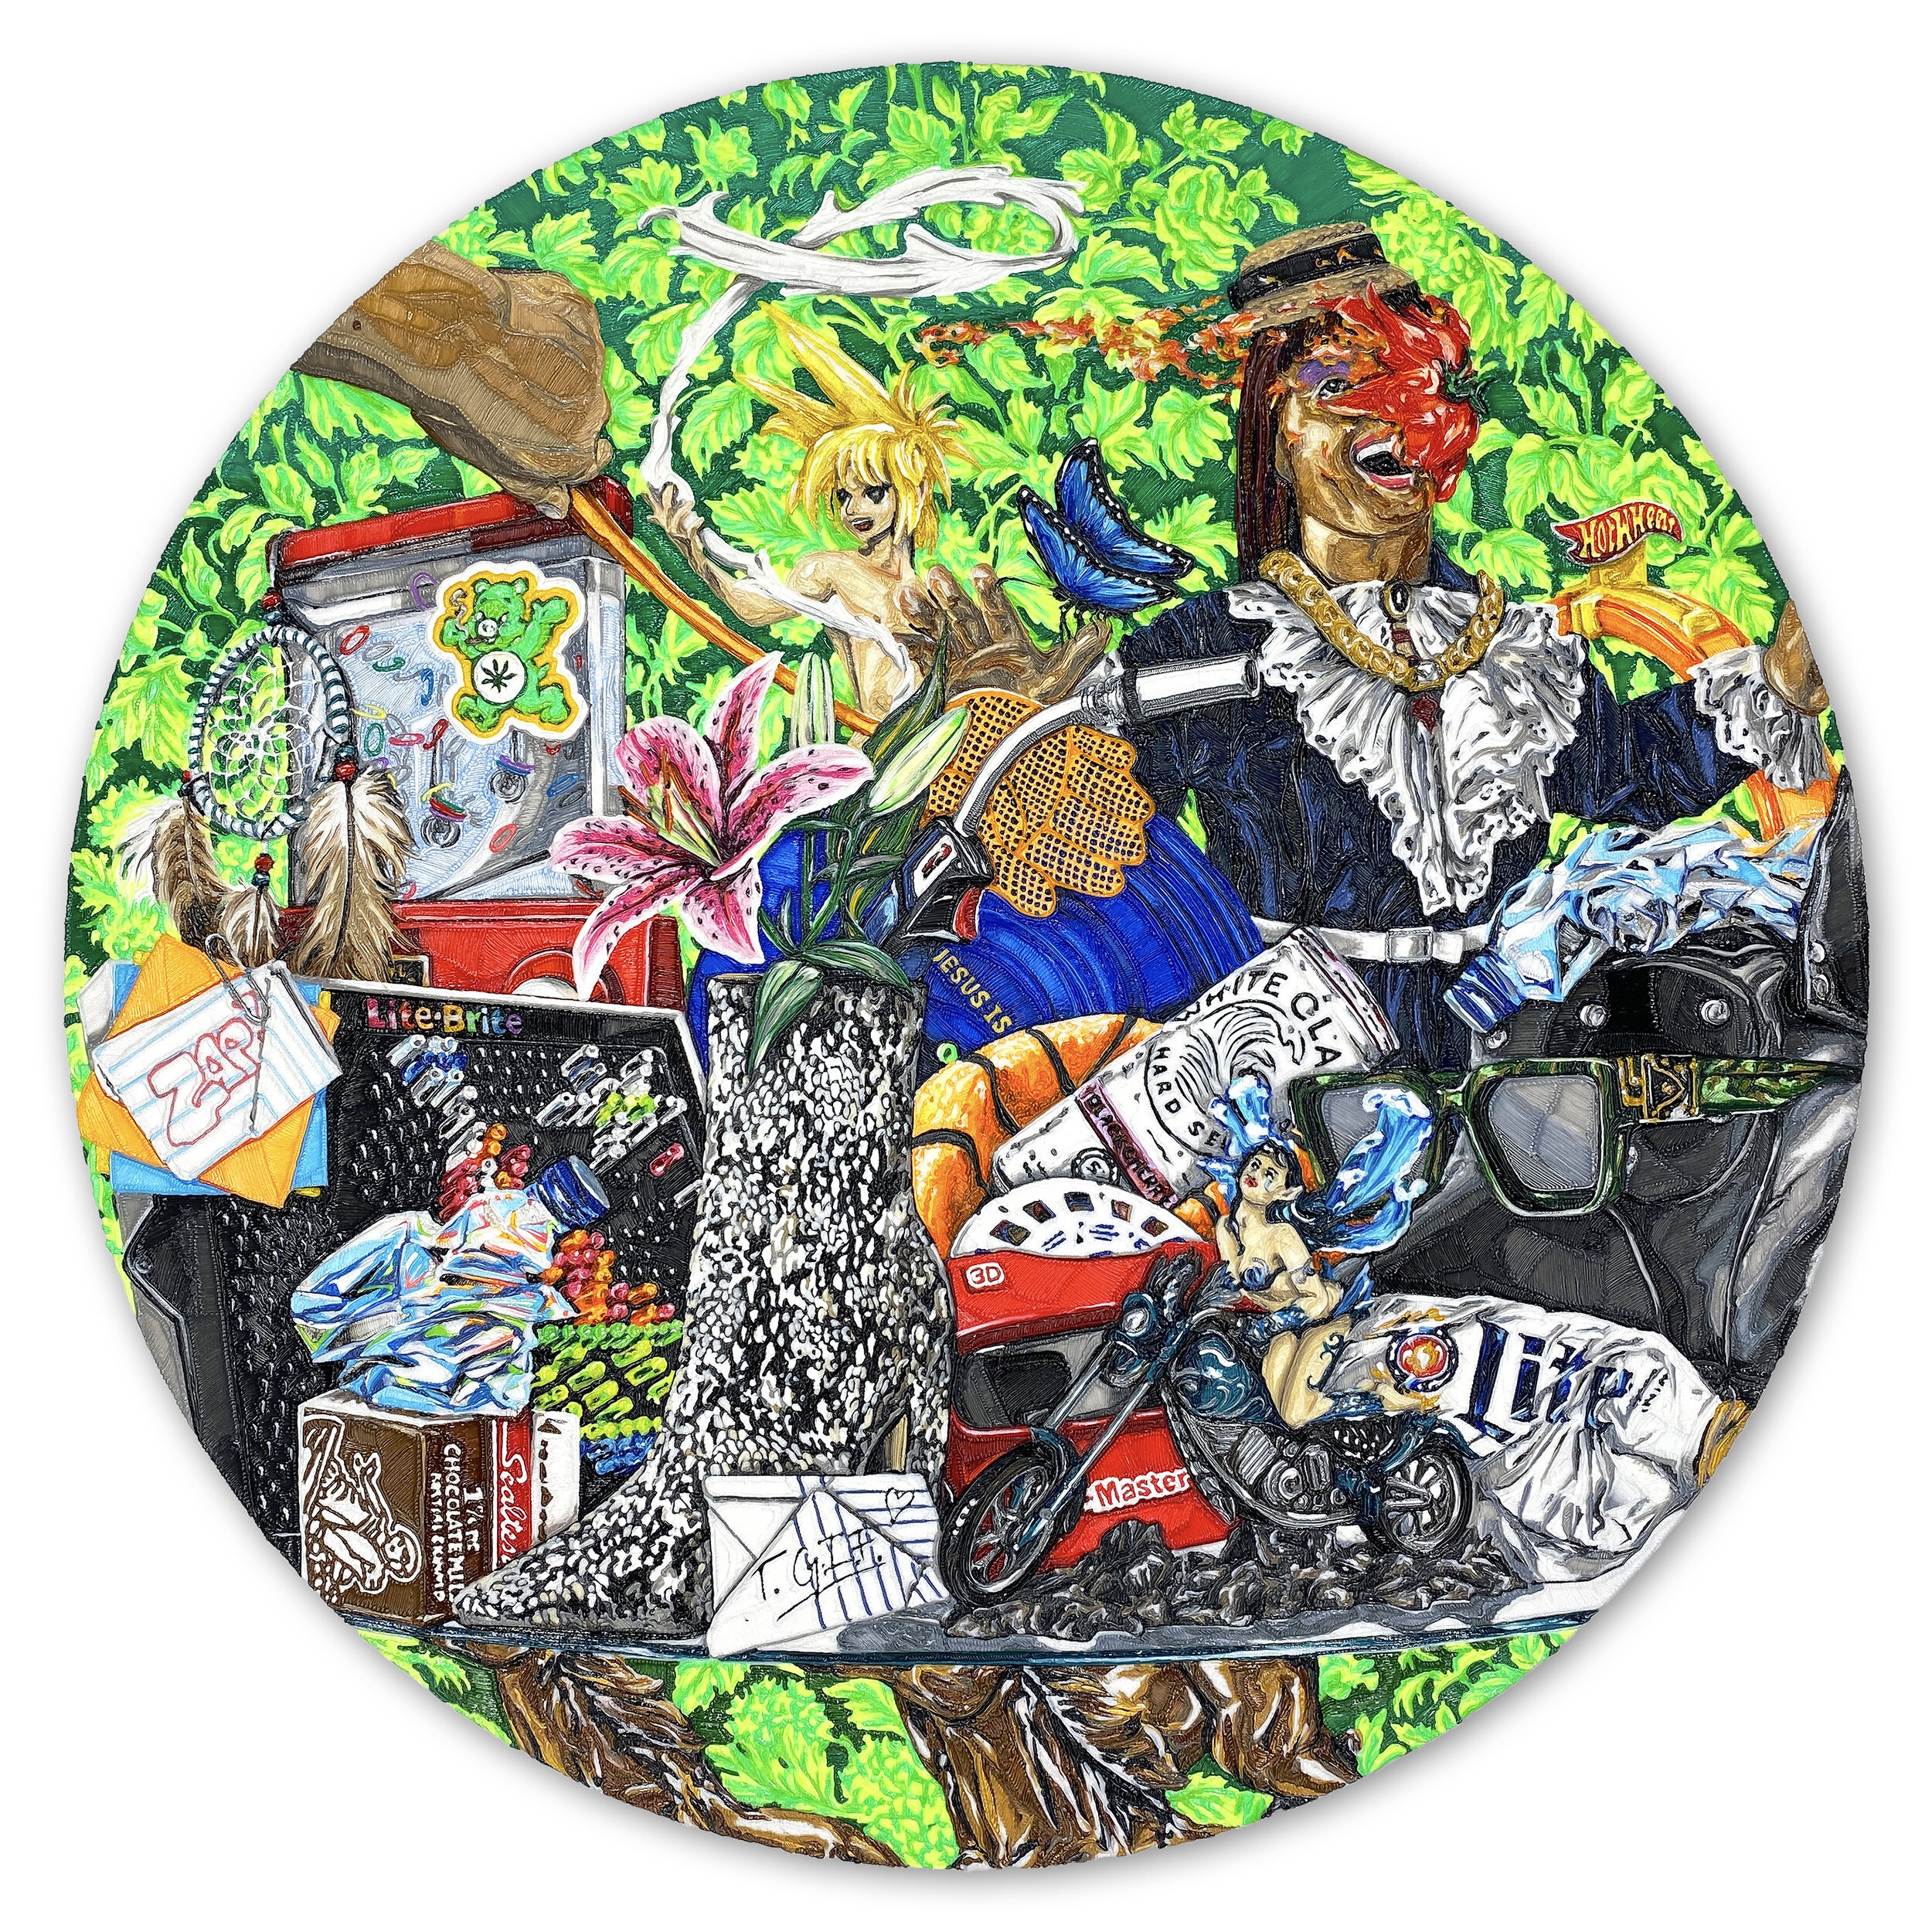  LIME-LITE, 2019  36 inches in diameter, PLA on panel 